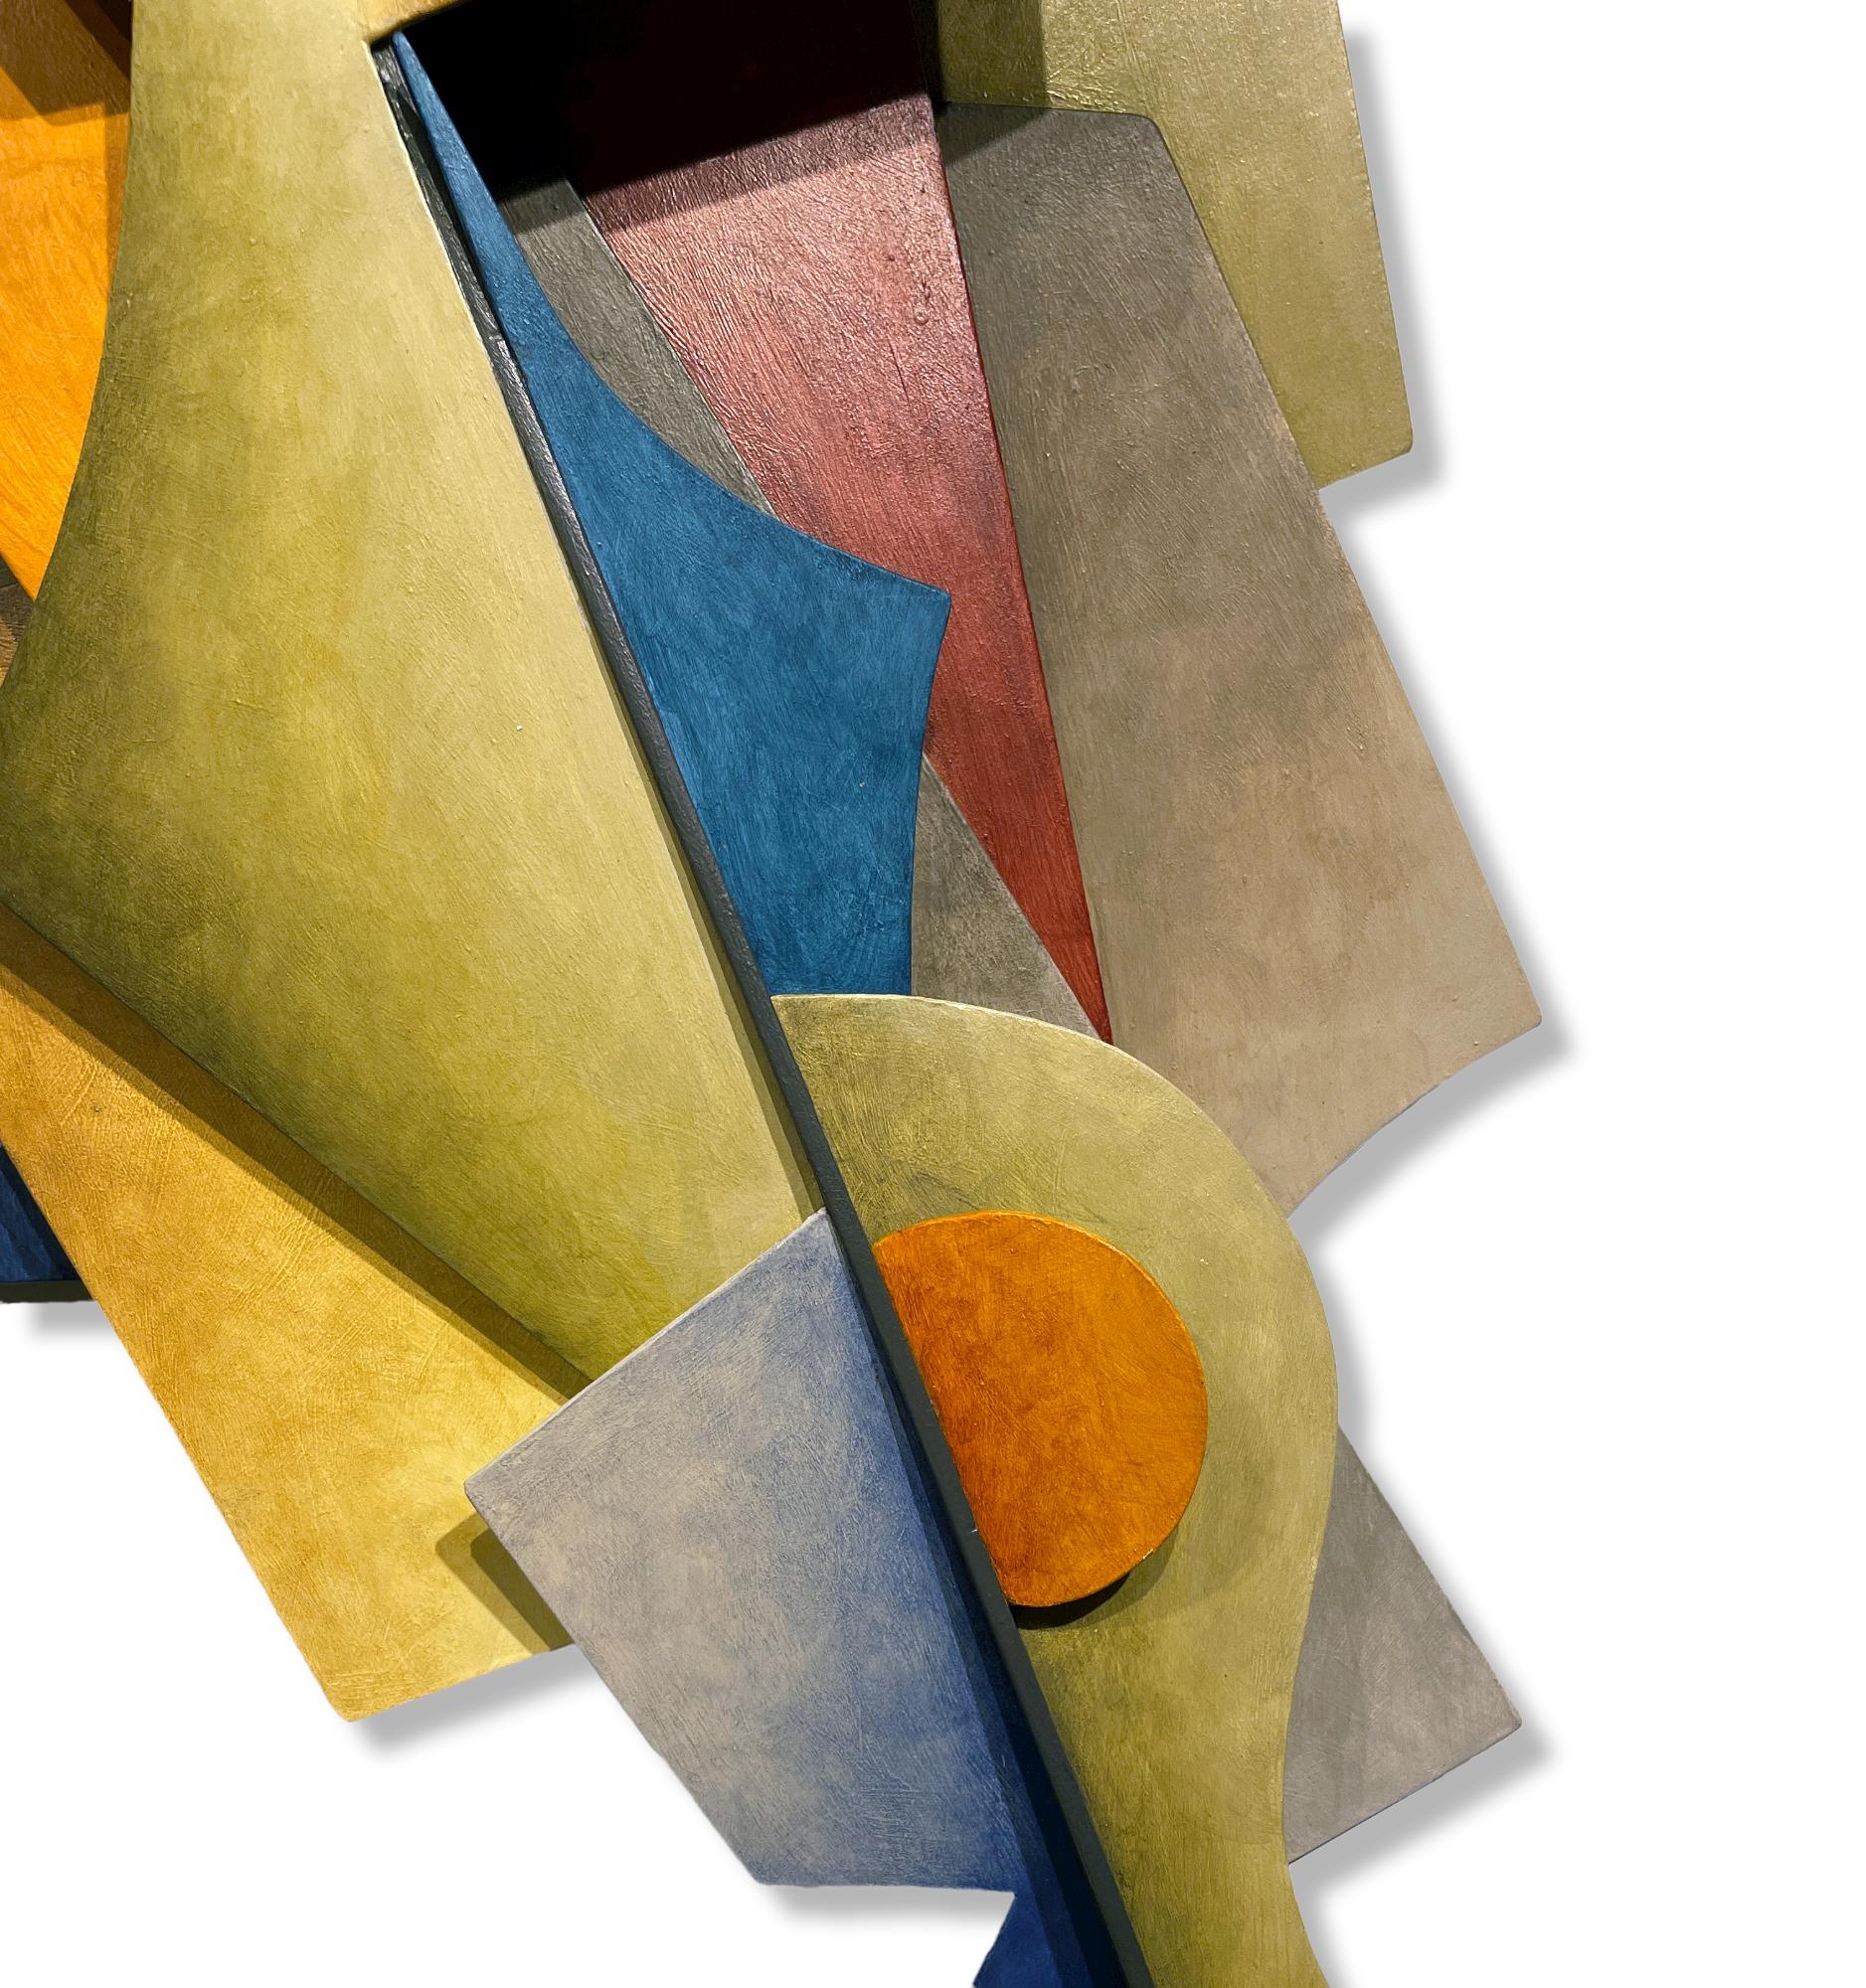 This dynamic wall sculpture is created from sheets of steel, welded together in an abstract geometric pattern.  Earth tones of blue, orange, purple and yellow dominate and are balanced by softer hues. While the work adheres to a rigid, rational